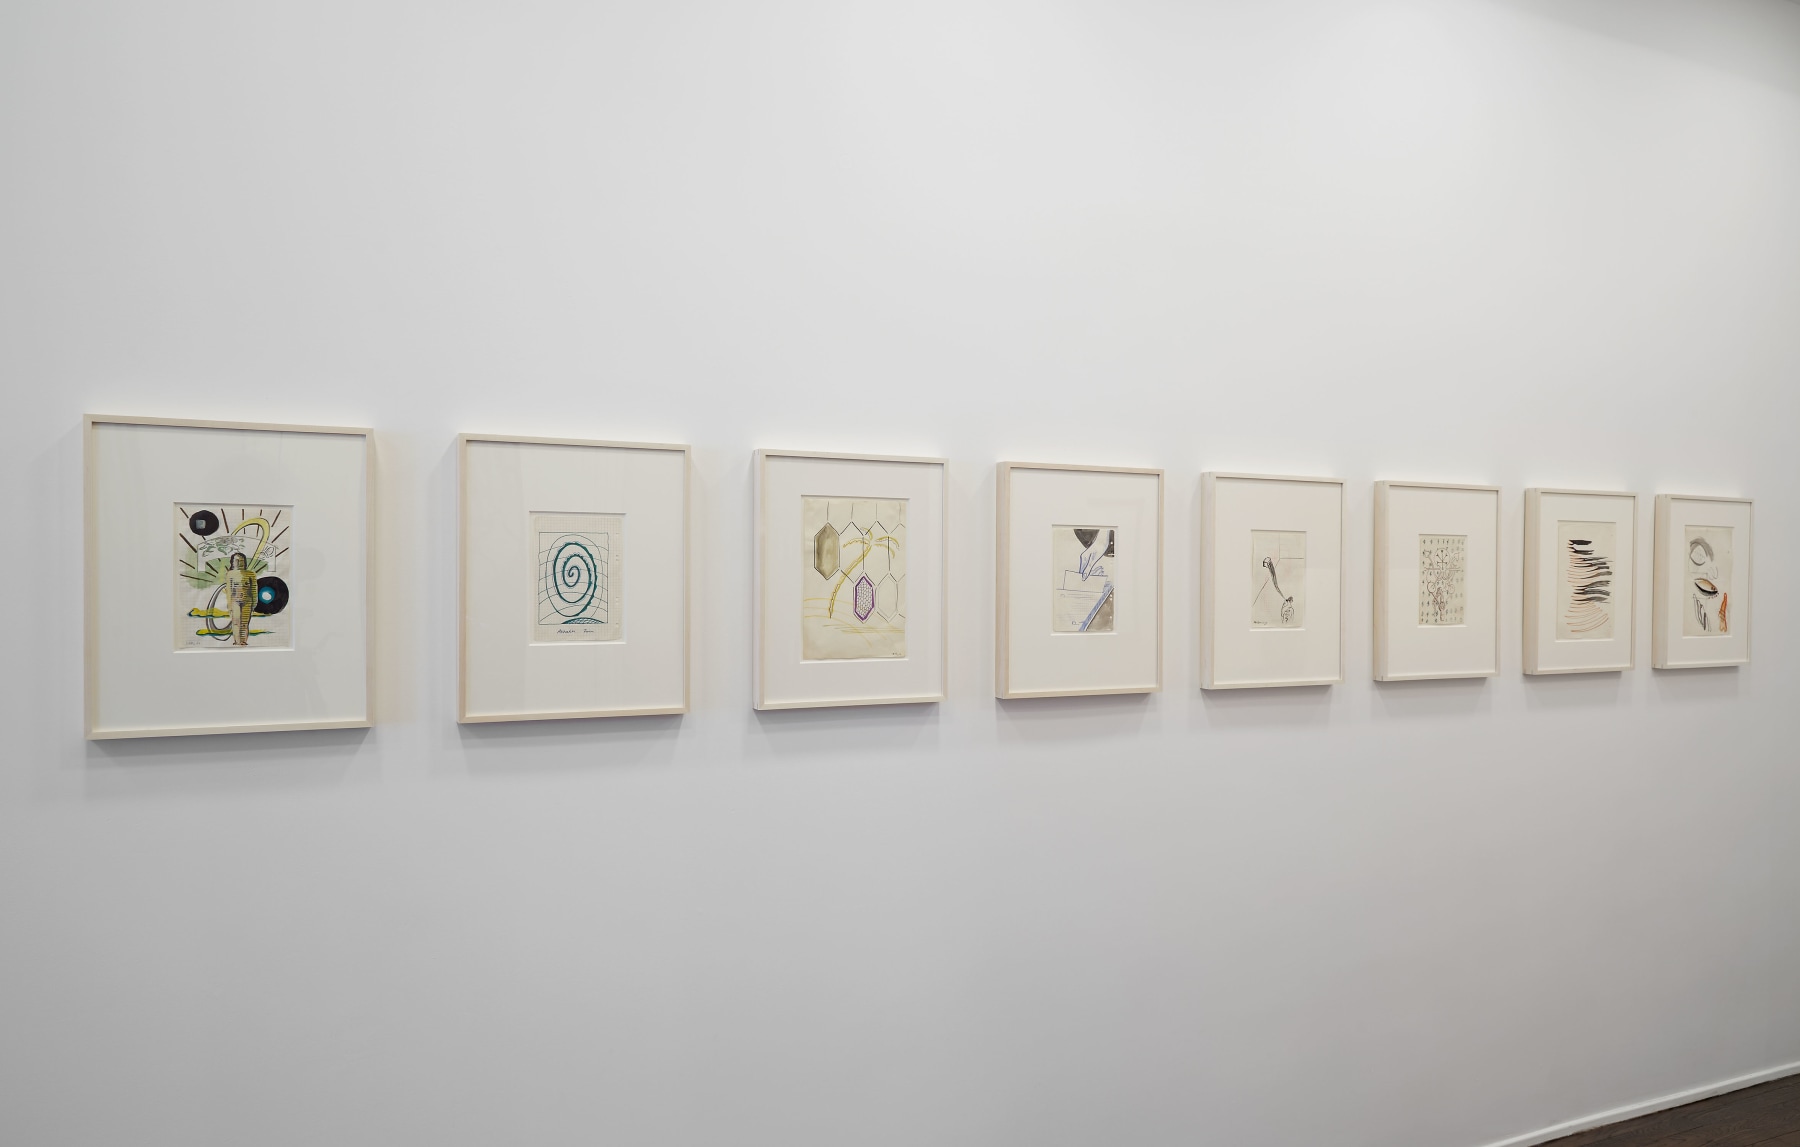 Sigmar Polke, Early Works on Paper, New York, 2014, Installation Image 10